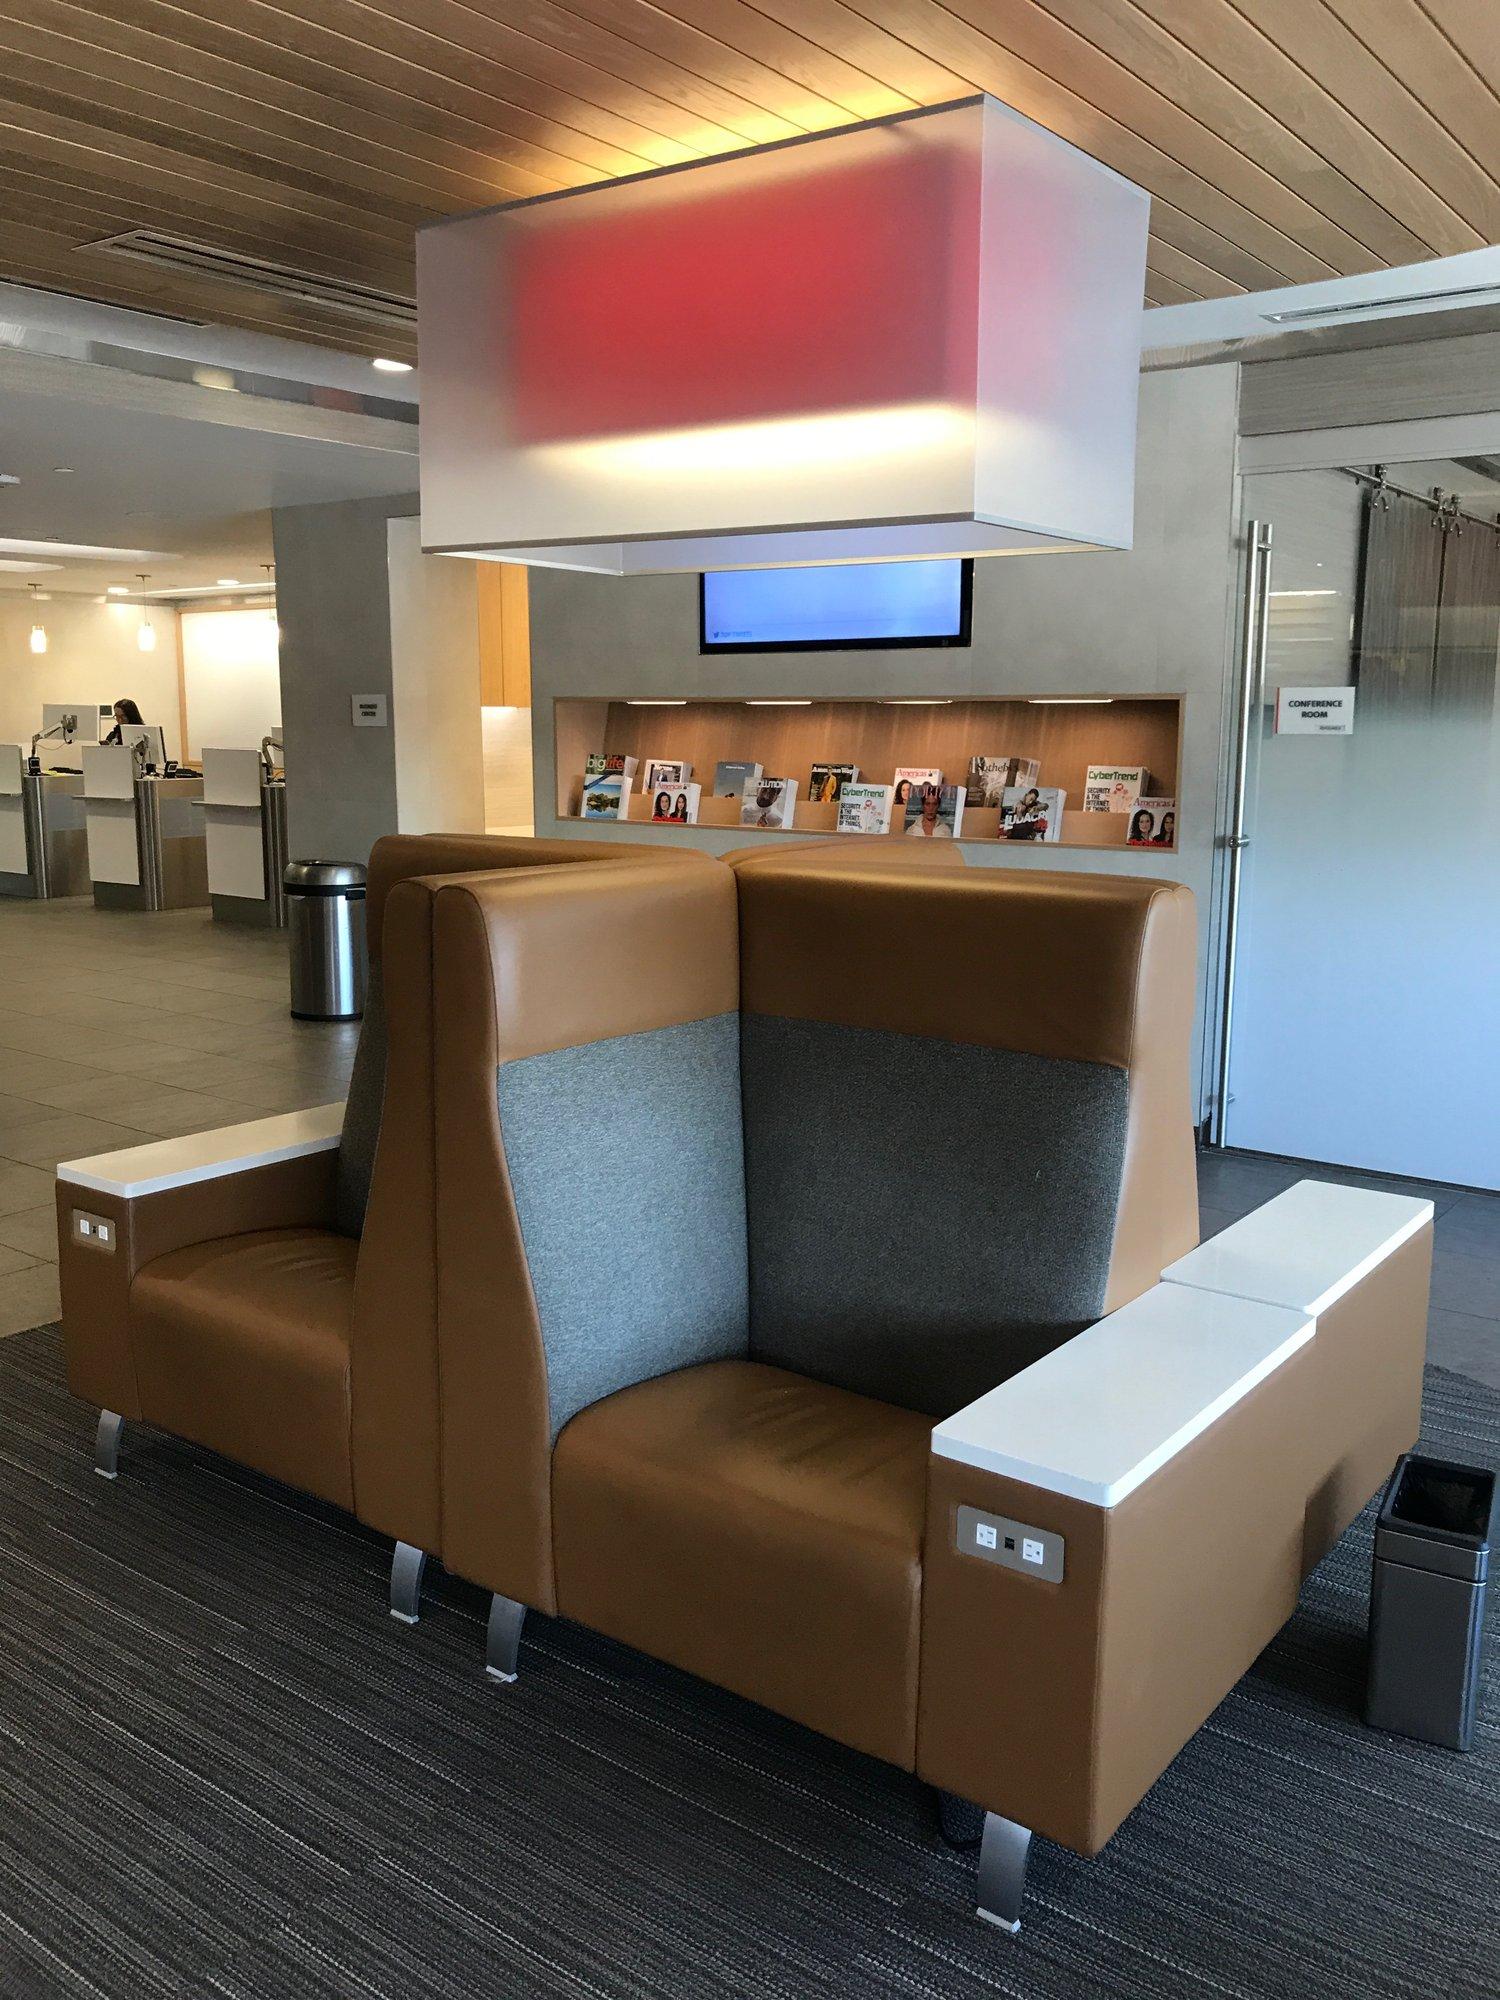 American Airlines Admirals Club (Gate A7) image 15 of 25